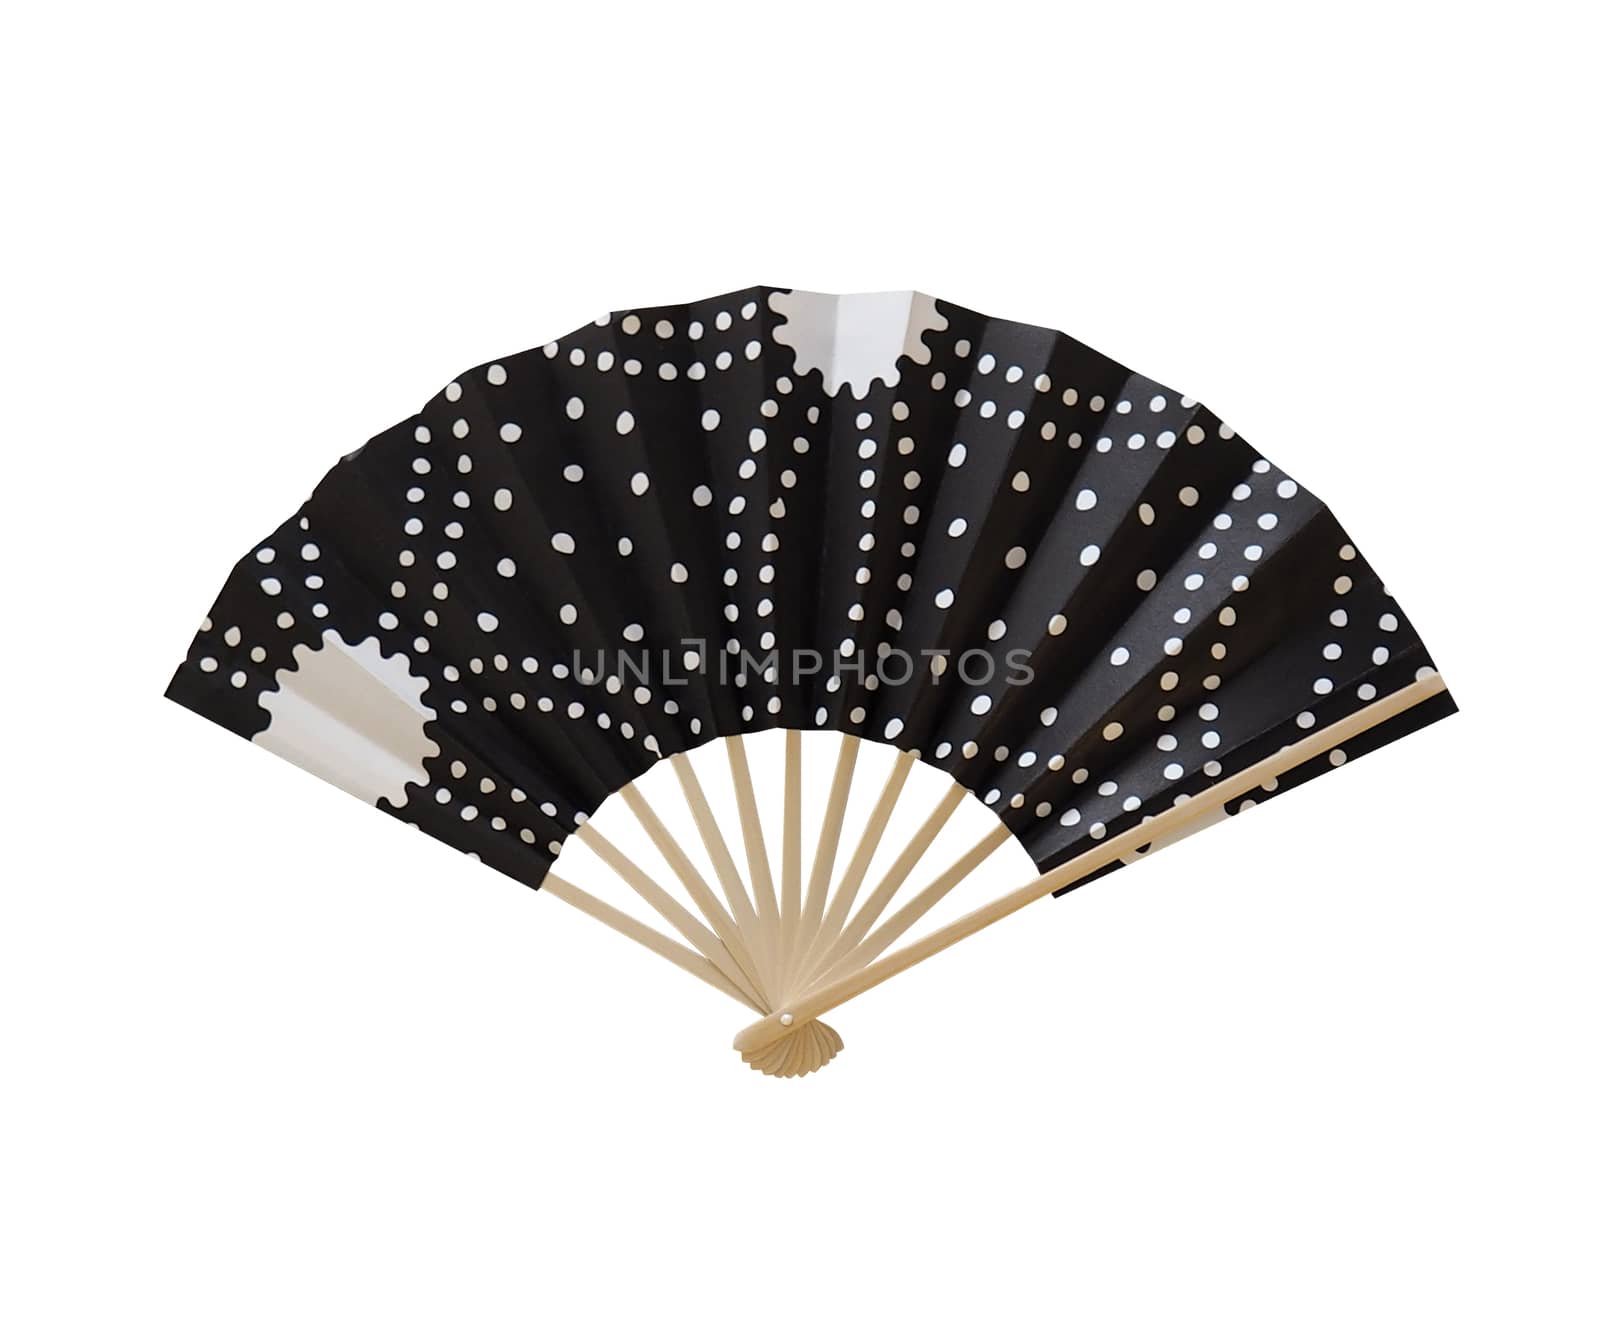 Japanese paper fan and black color and made from paper and white background.